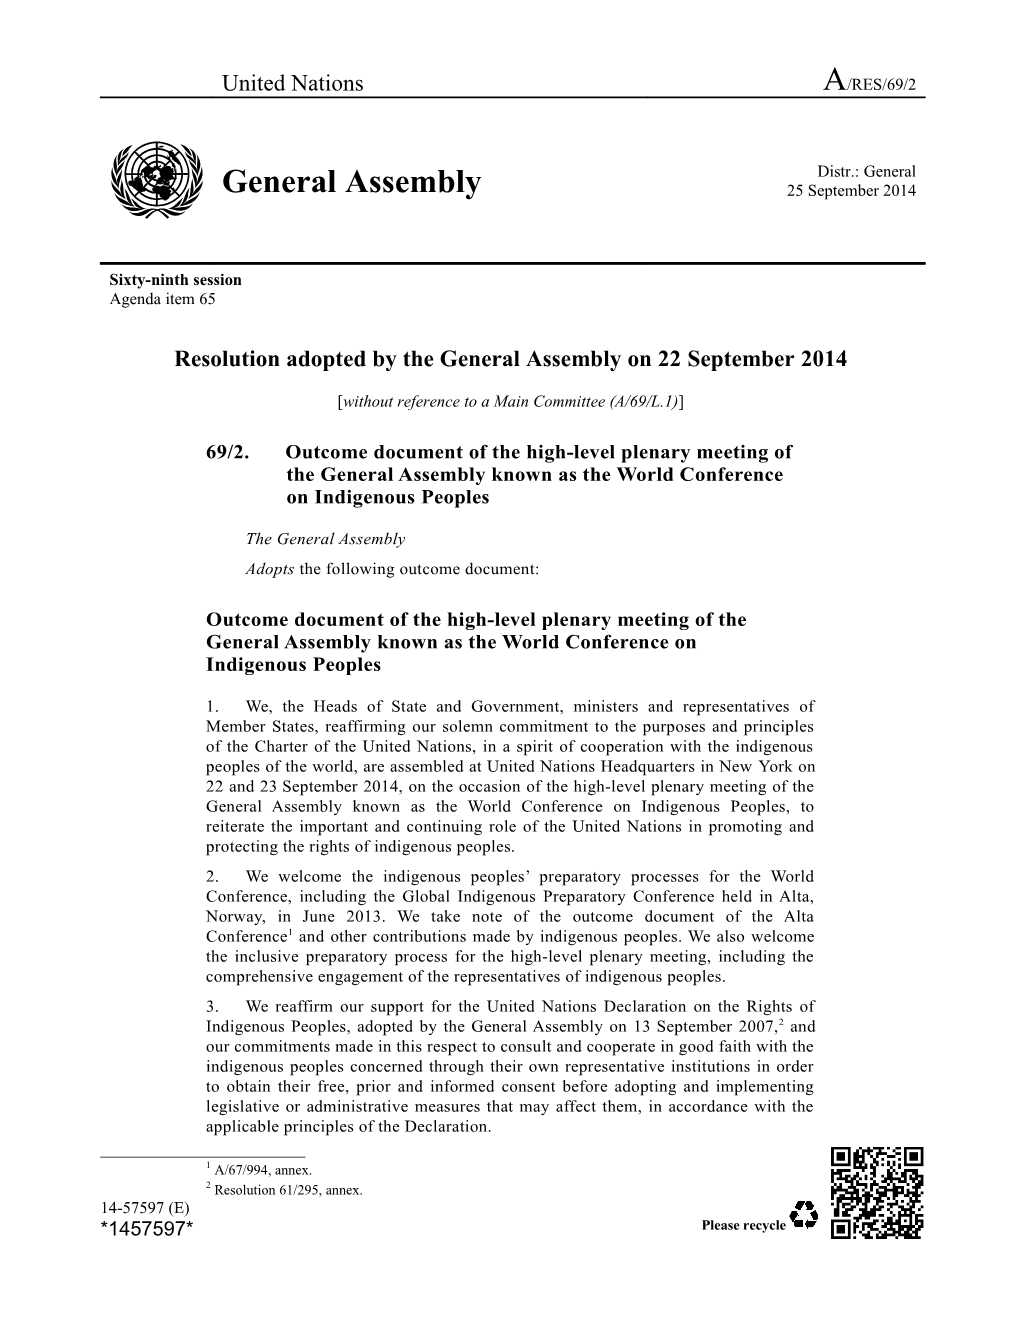 Resolution Adopted by the General Assembly on 22September 2014